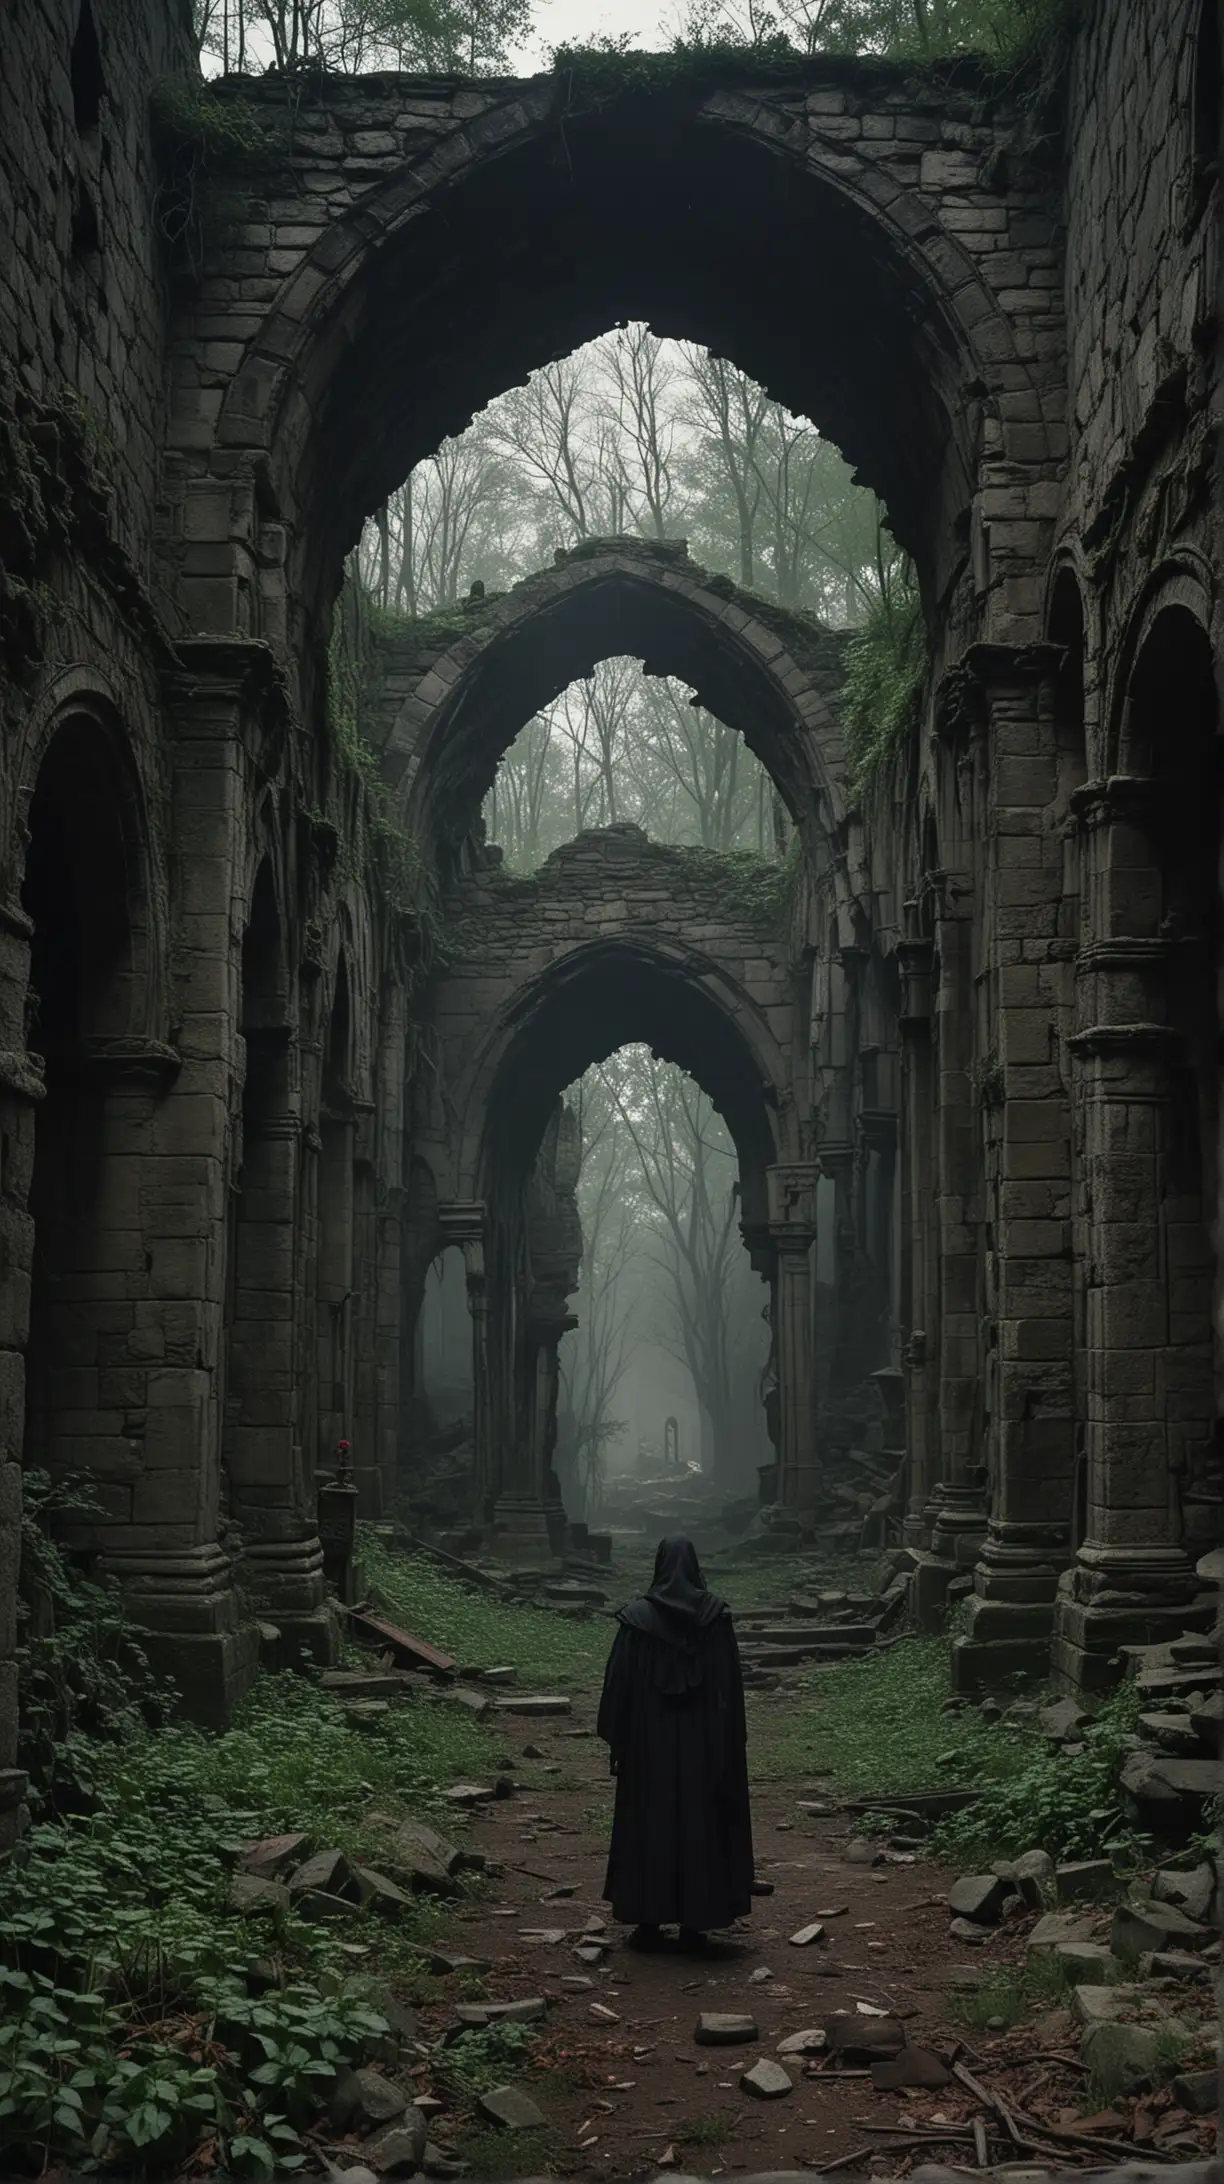 Deep within a forgotten forest, the ruins of St. Aradia’s Monastery lay shrouded in darkness and whispered secrets. Villagers spoke of eerie disturbances emanating from the decaying site, prompting the Church to send Father Michael, a devout priest, to investigate, very clear and 4k quality photo 